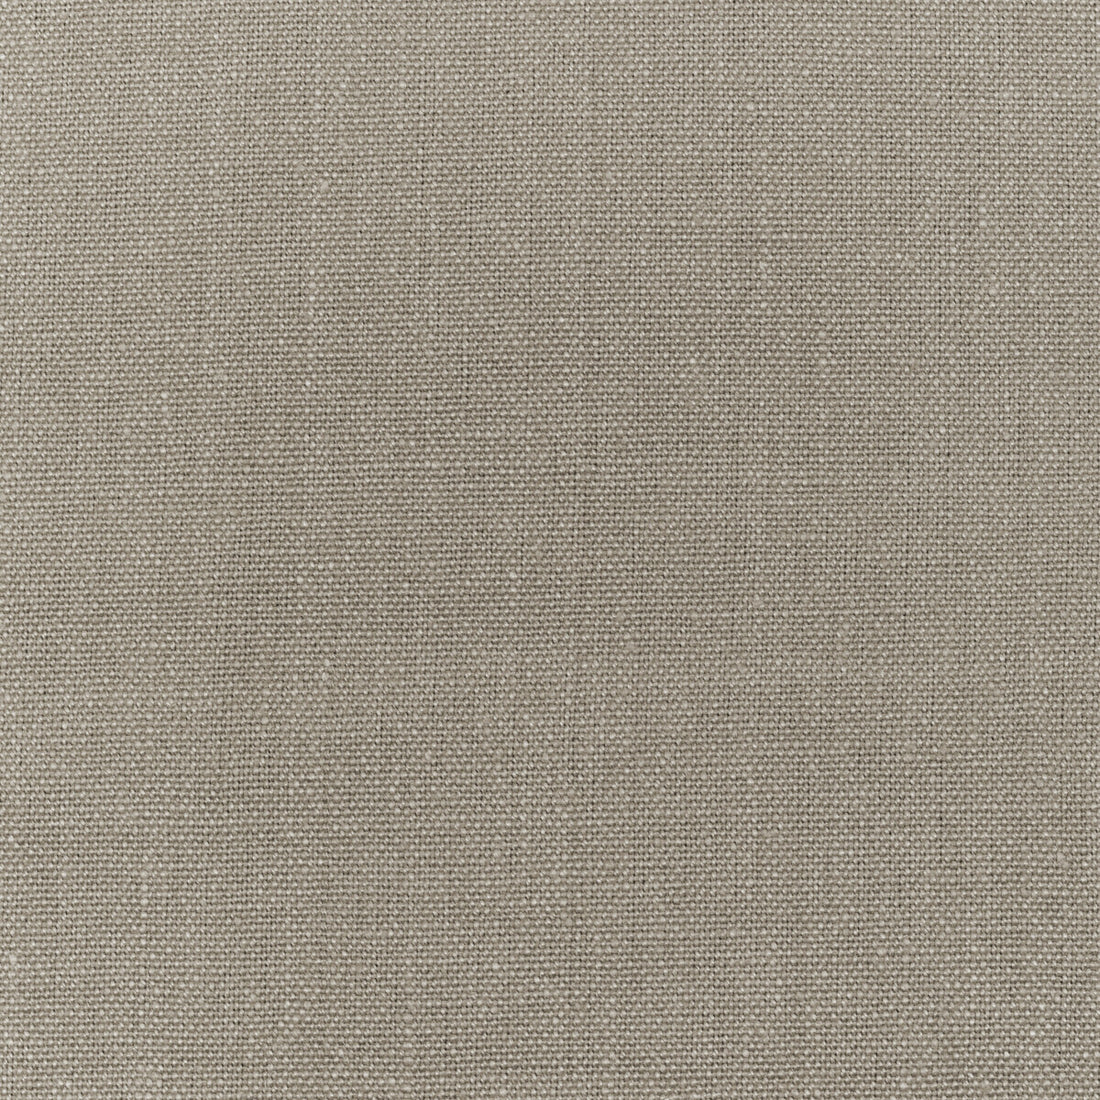 Watermill Linen fabric in dove color - pattern 2012176.11.0 - by Lee Jofa in the Colour Complements II collection